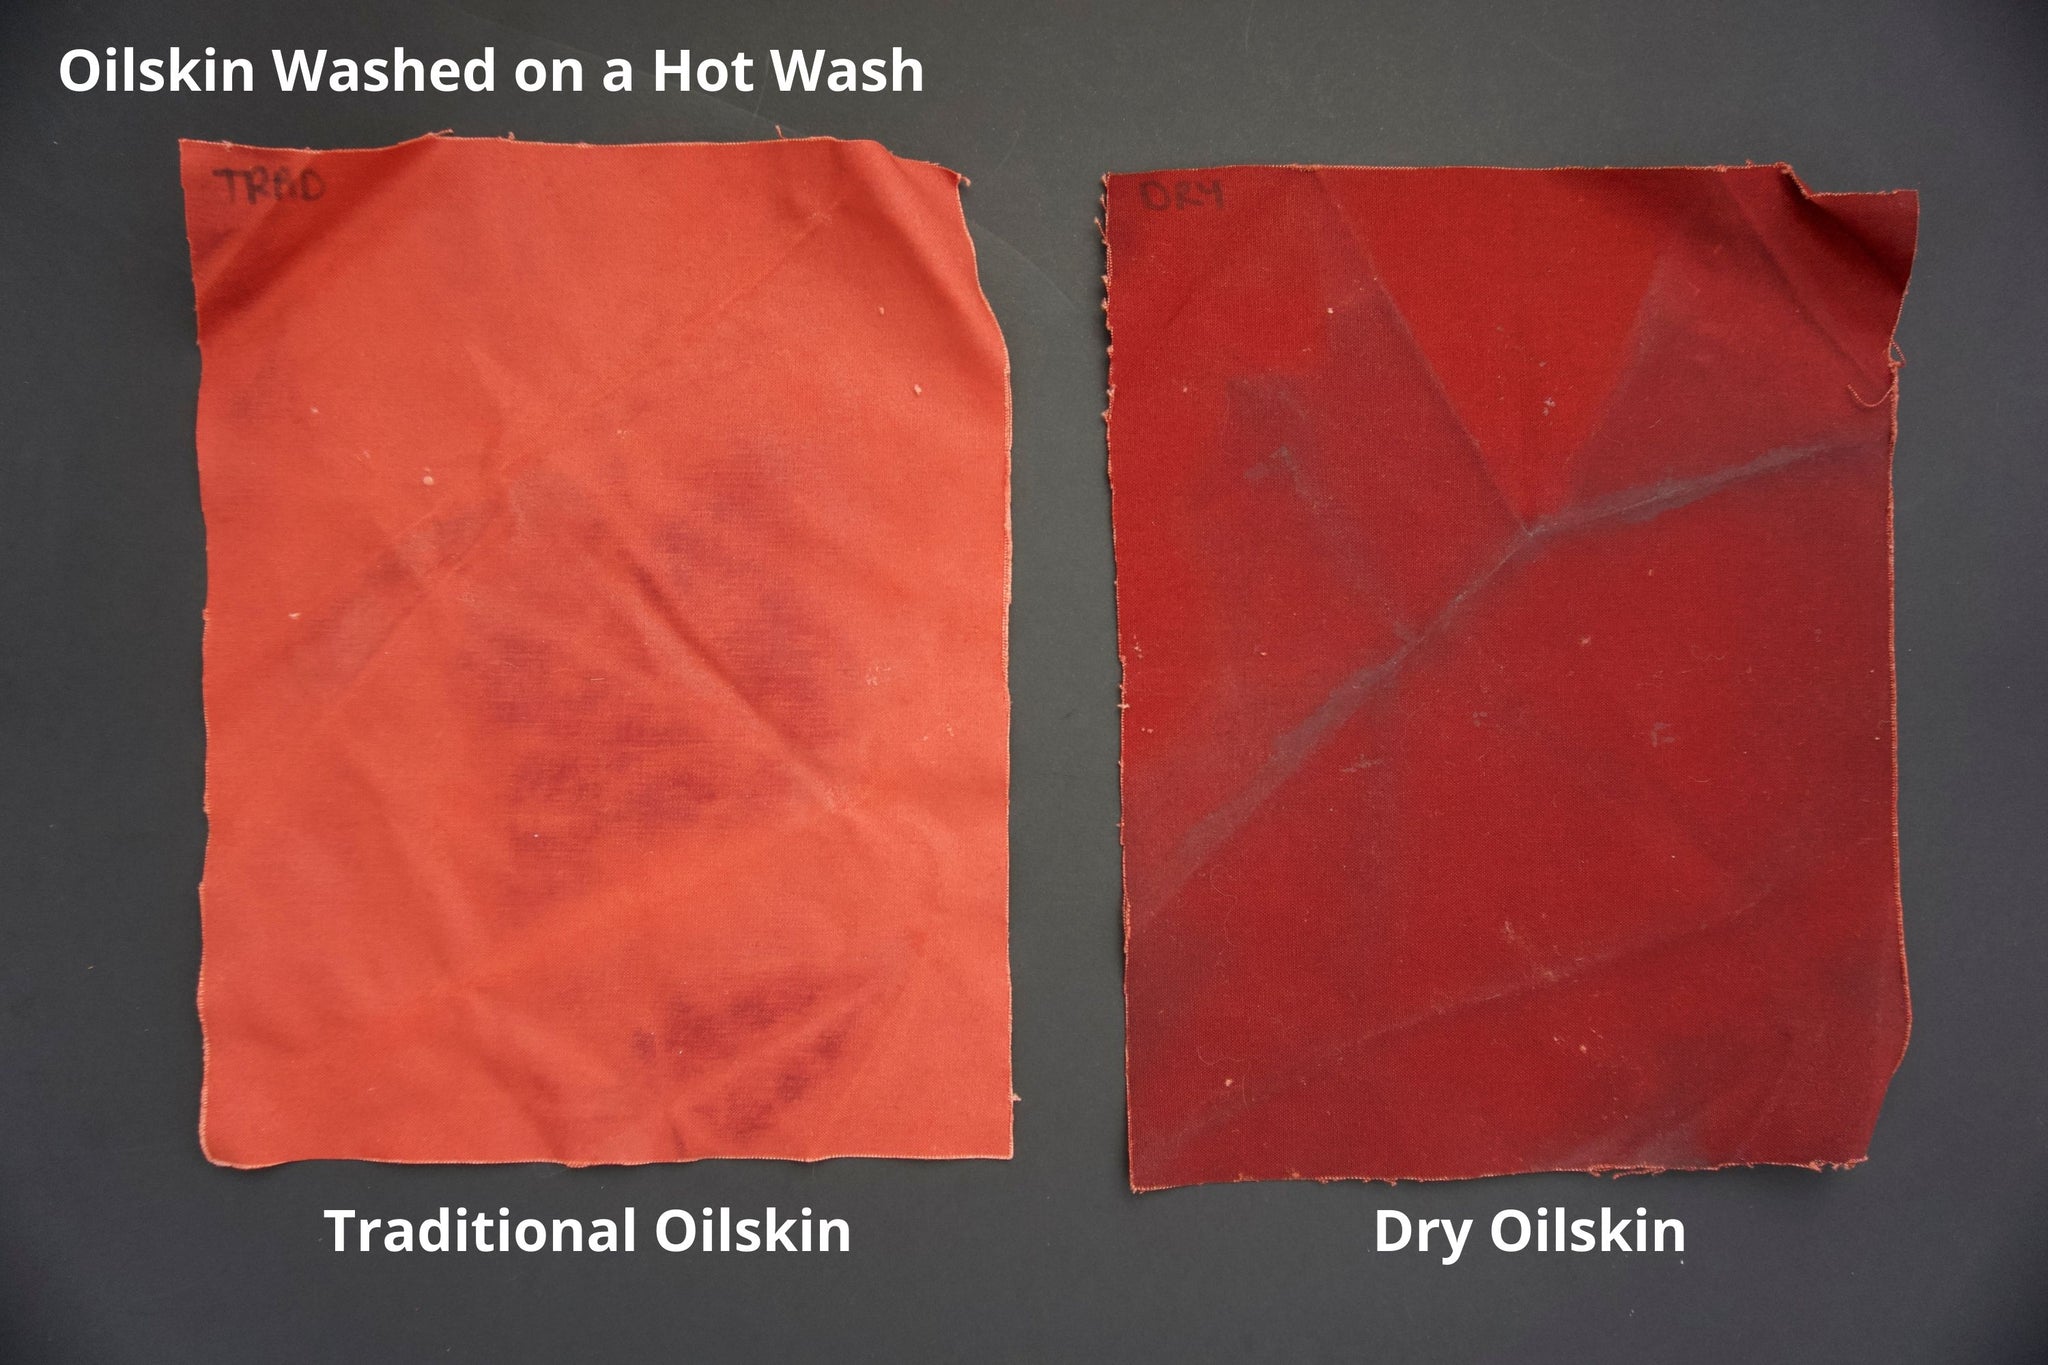 two pieces of oilskin side by side after they have been washed on a hot wash. they are very scrunched and washed out